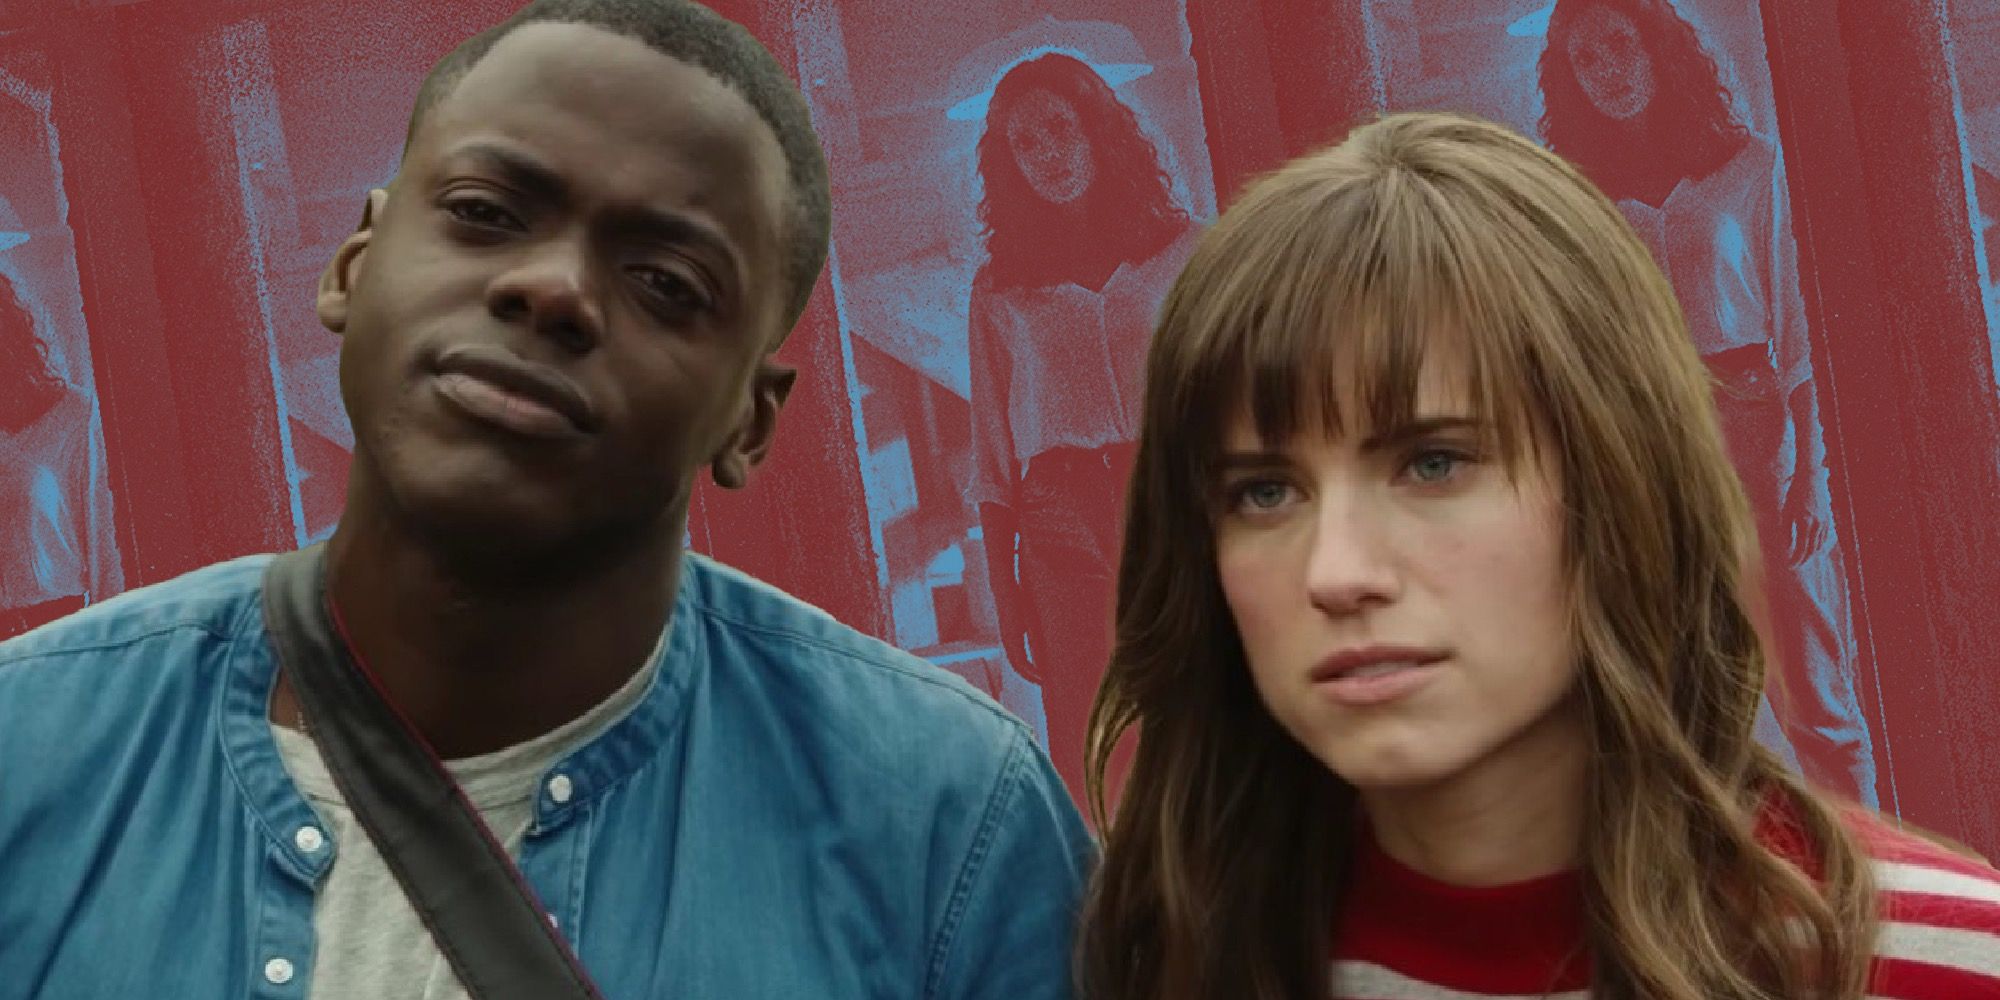 Get Out's Chris and Rose against a bacground with a faded version of the Barbarian poster art.